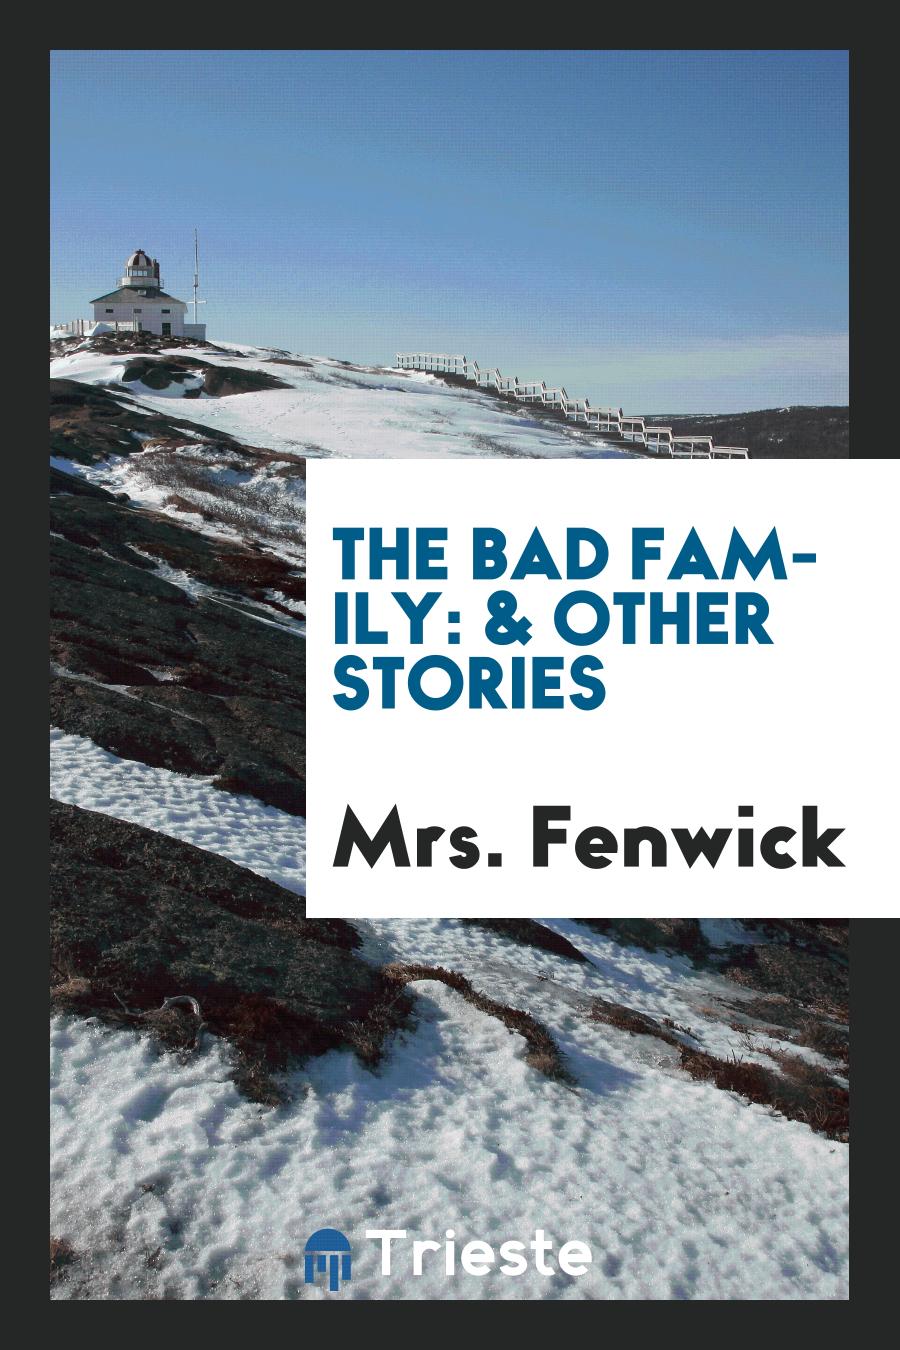 The Bad family: & other stories